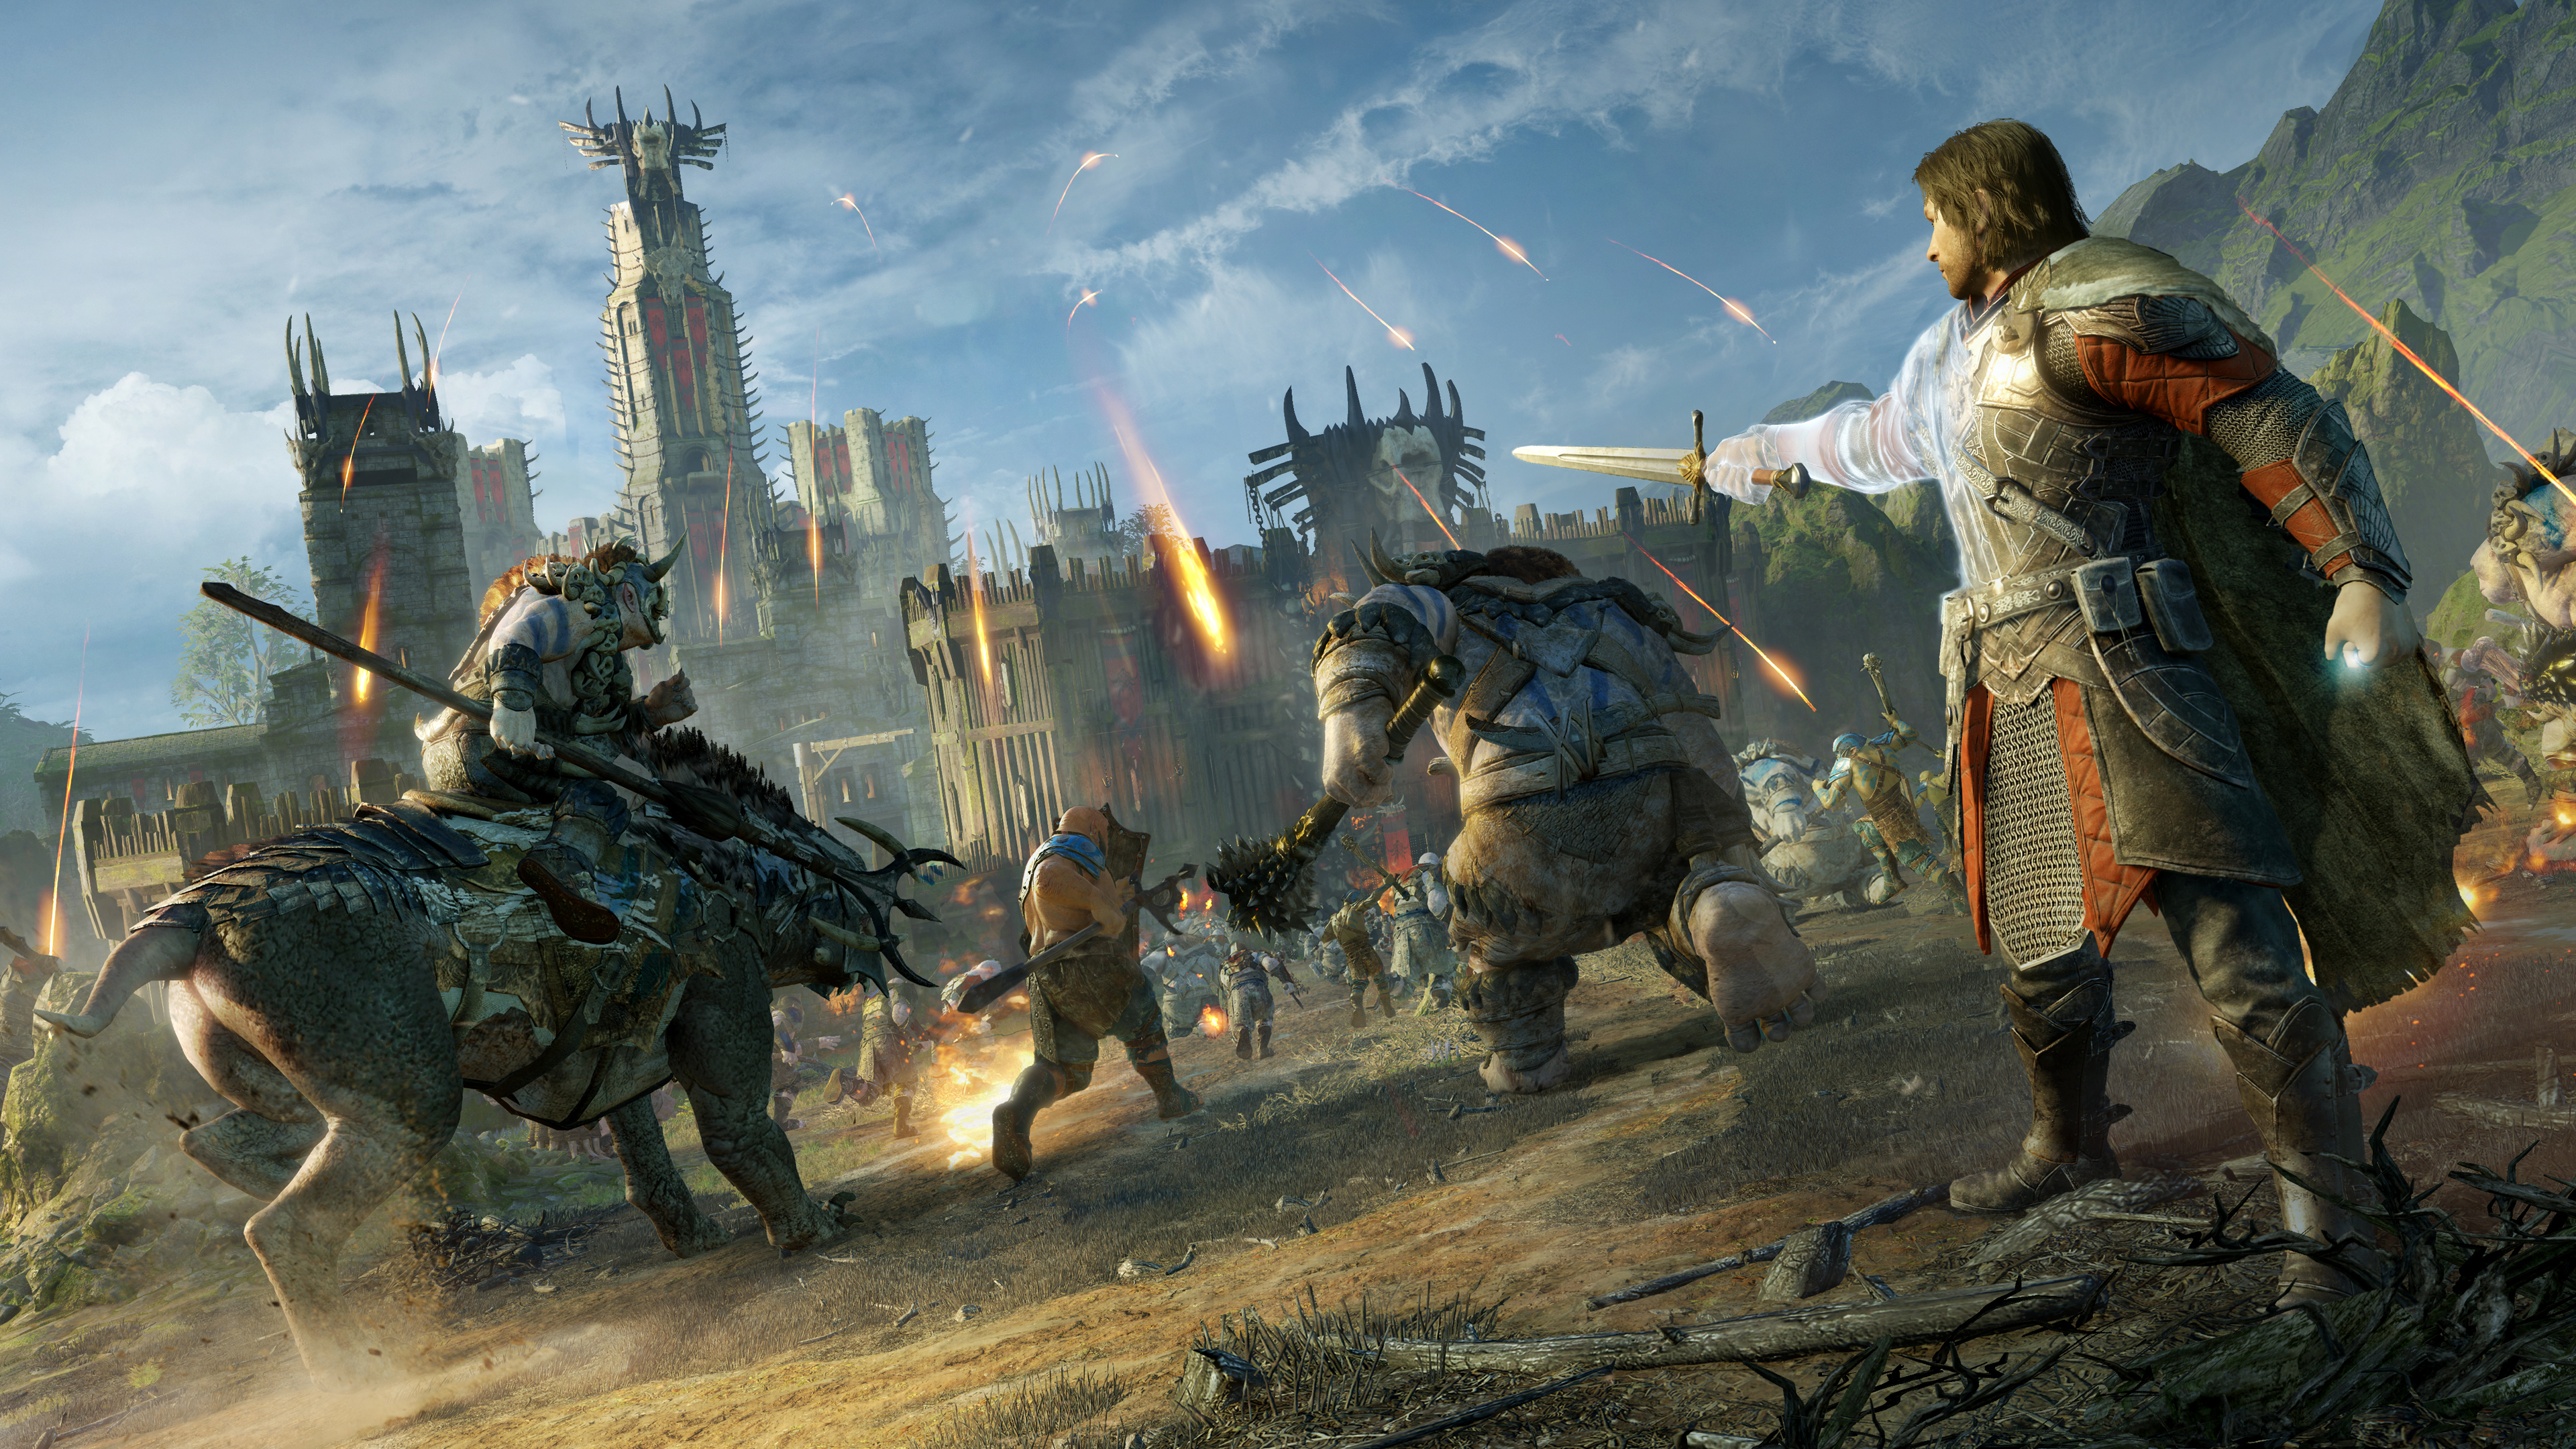 8 things to do in Middle-earth: Shadow of Mordor before you die